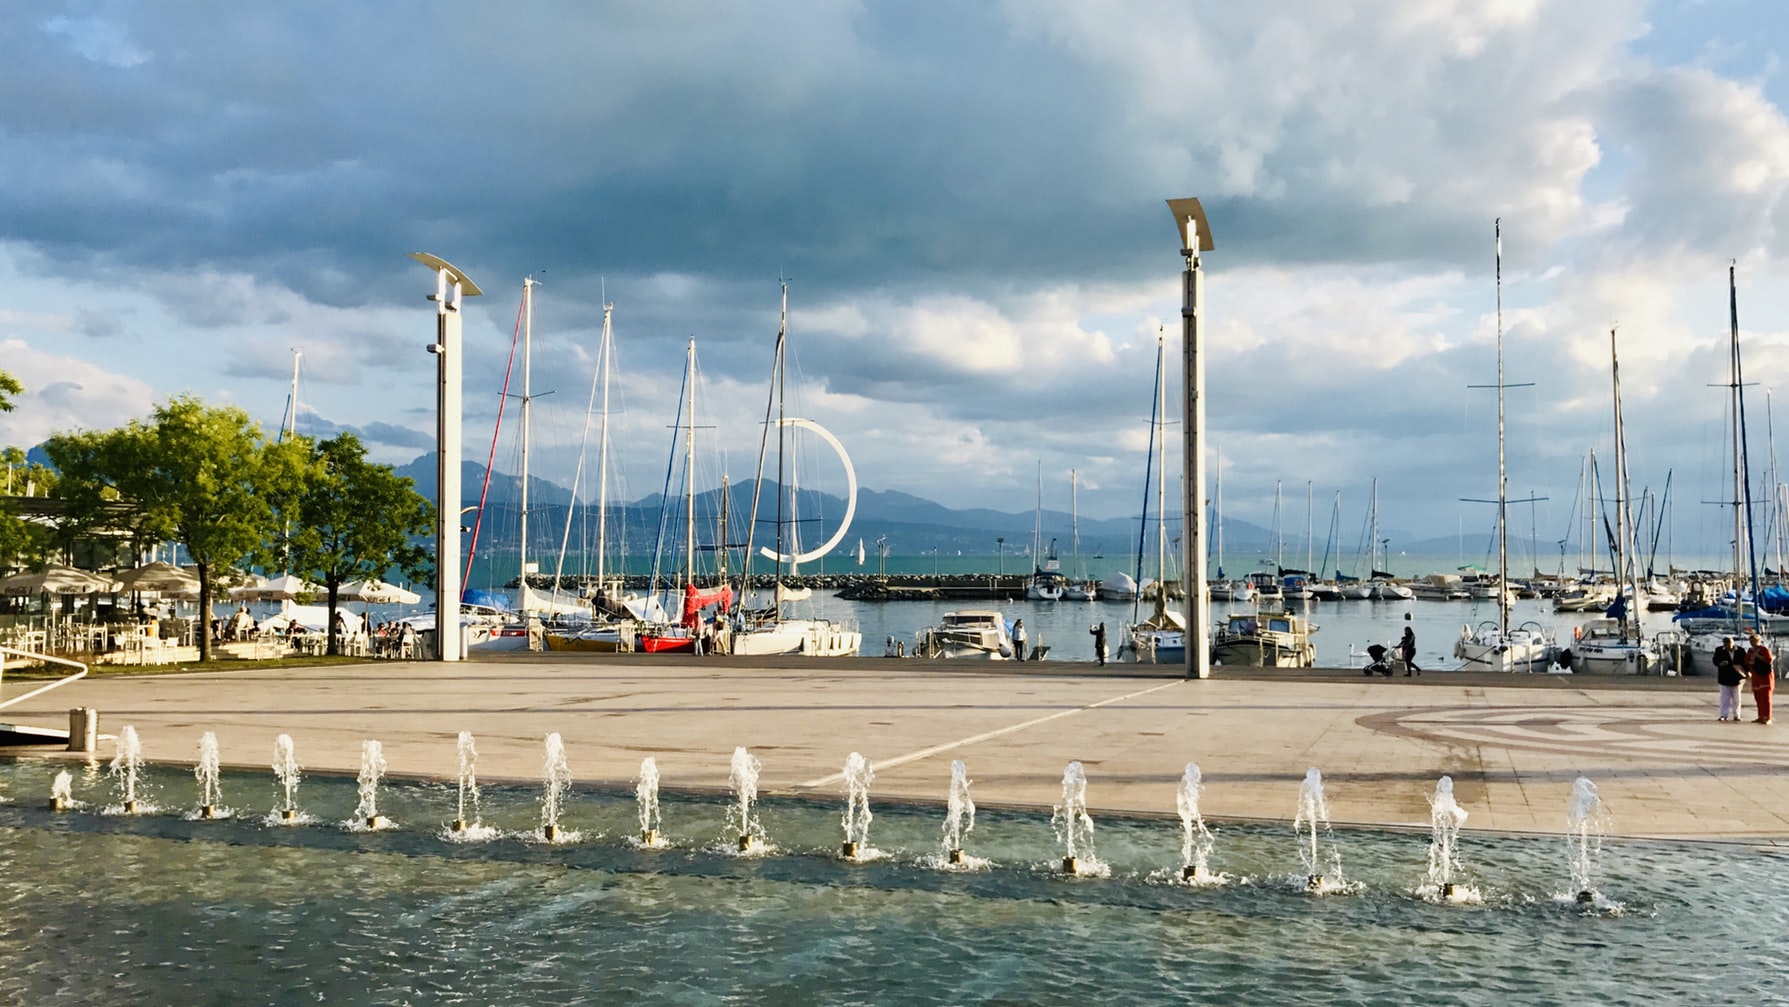 view of the harbor in Lausanne with boat masts and a fountain in the foreground